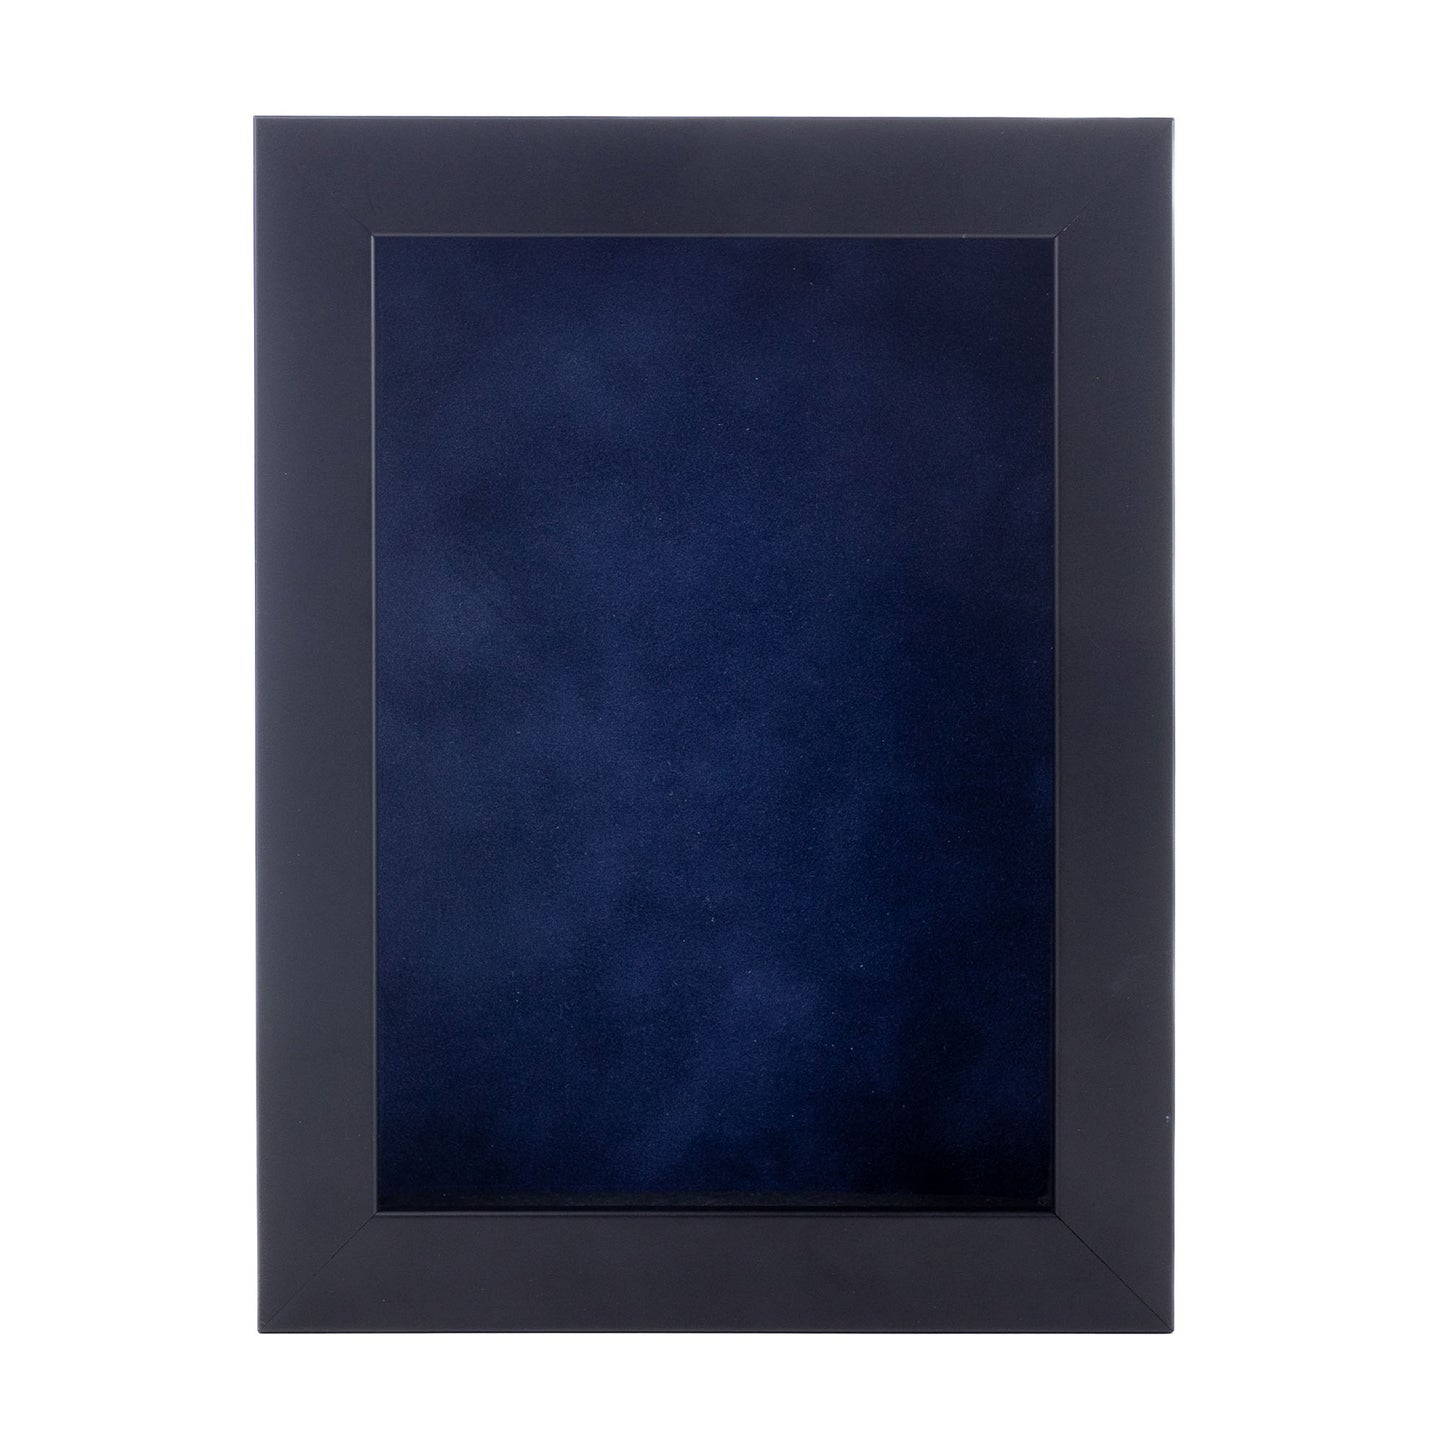 Black Shadow Box Frame With Navy Blue Acid-Free Suede Backing